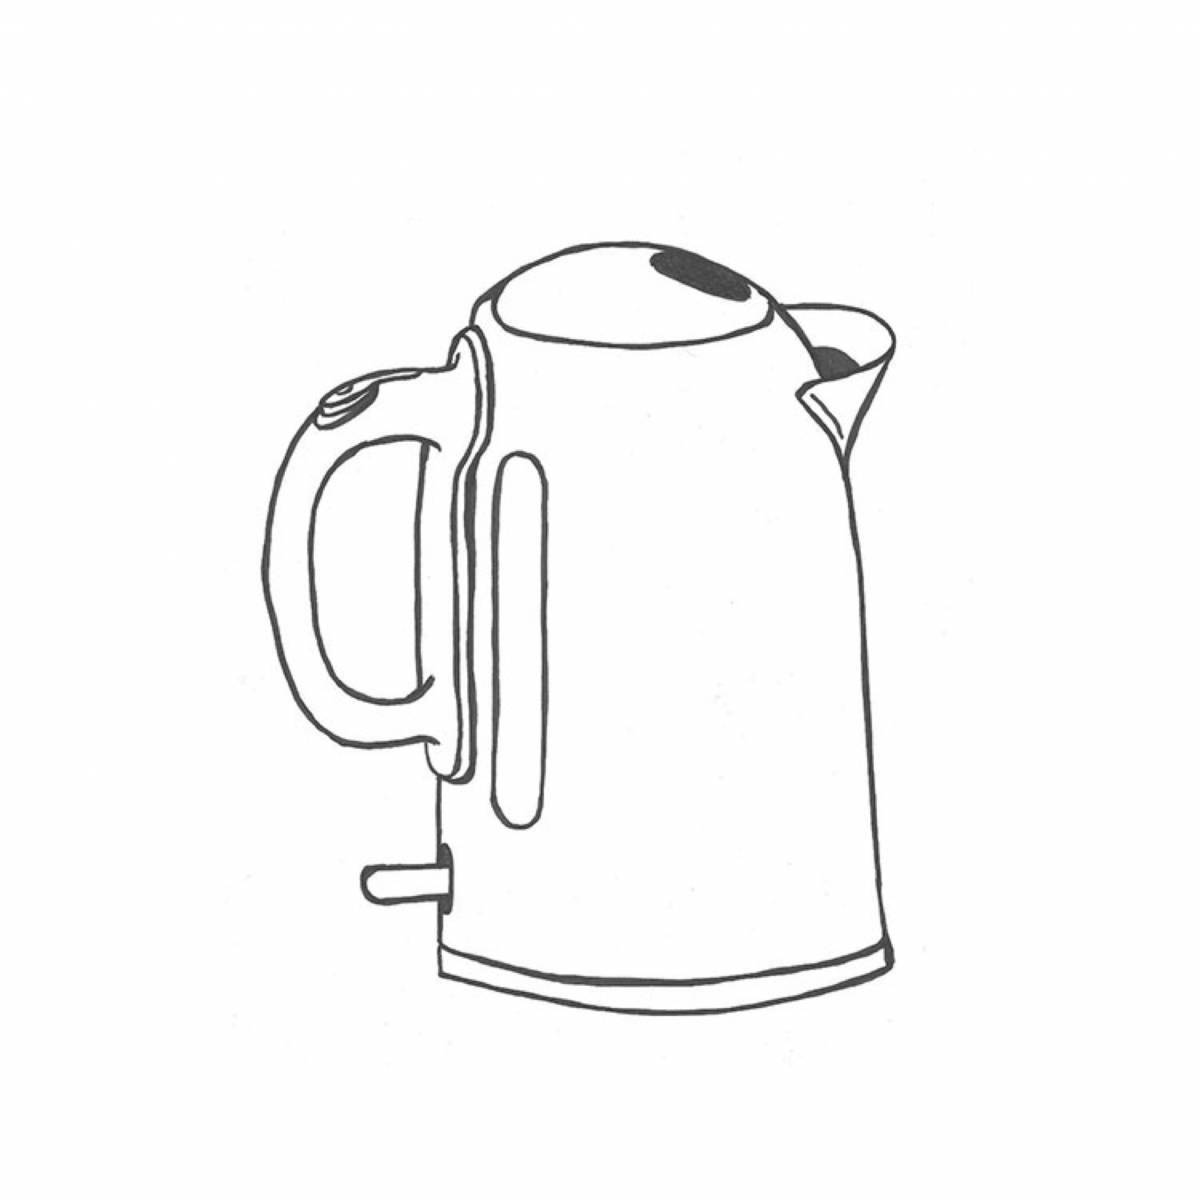 Adorable electric kettle coloring book for kids